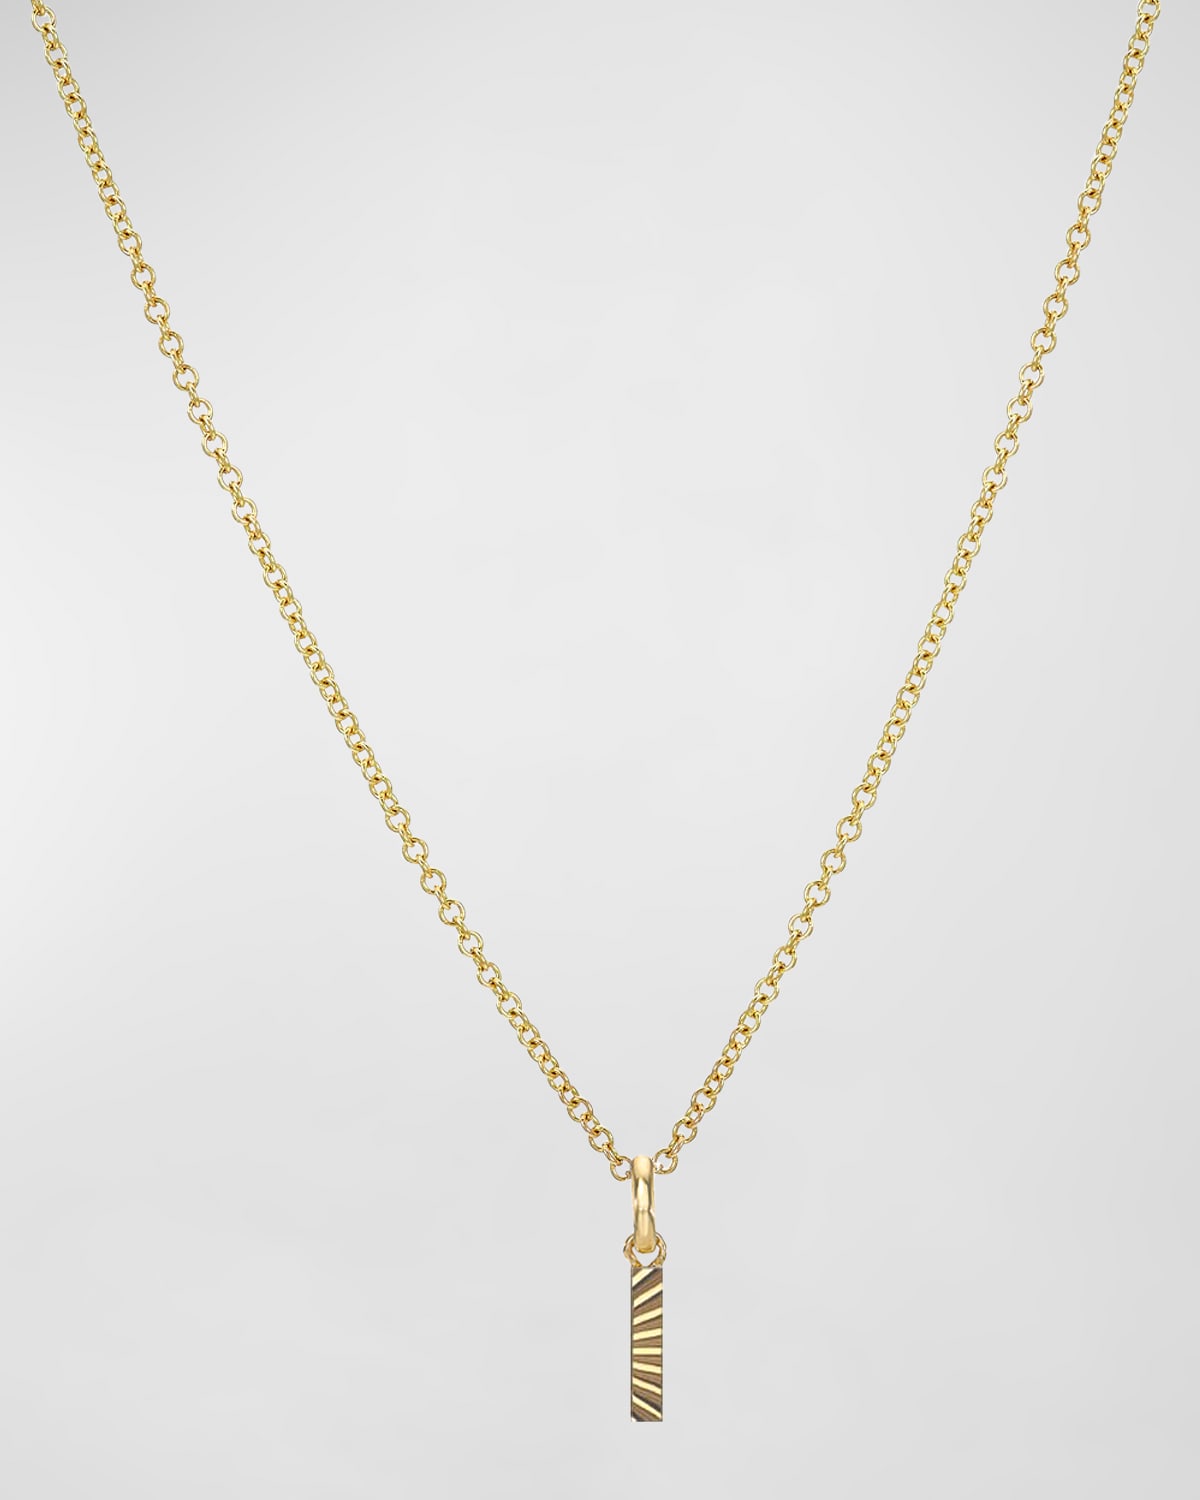 Zoe Lev Jewelry 14k Gold Initial Pendant Necklace